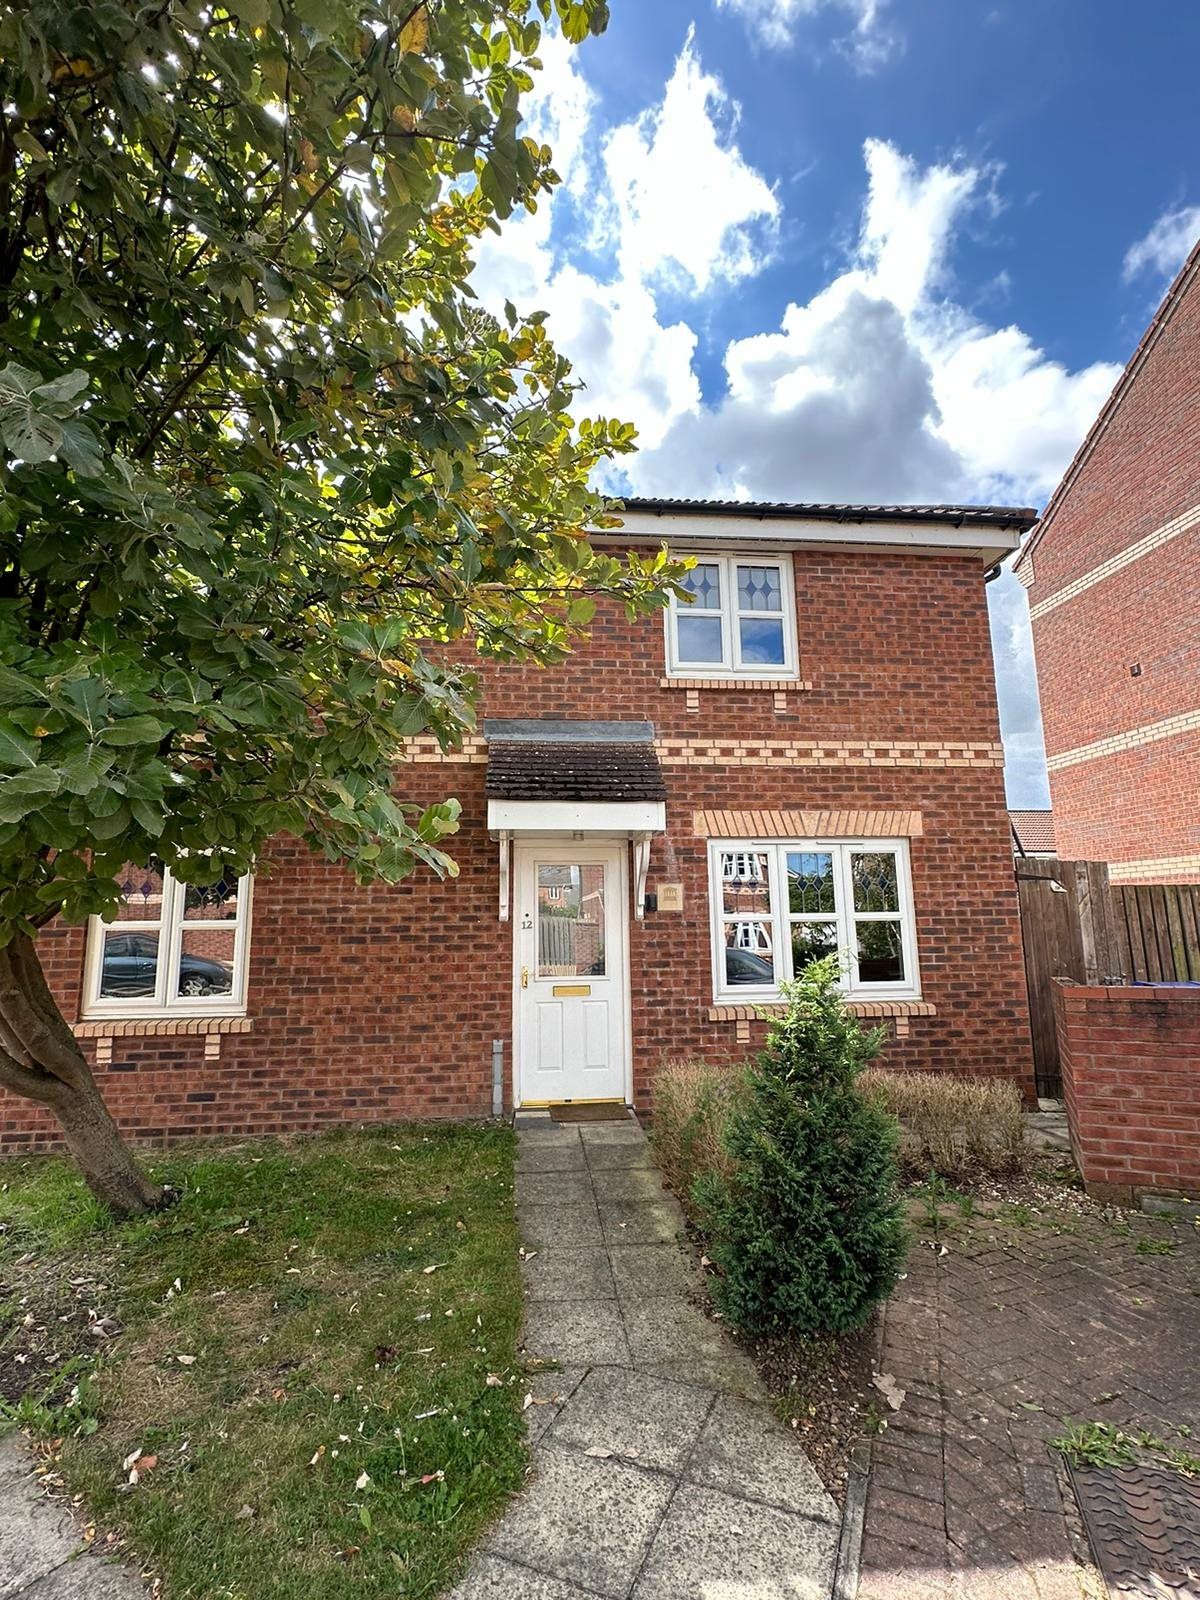 Twigg Crescent, Armthorpe, Doncaster, DN3 2FP